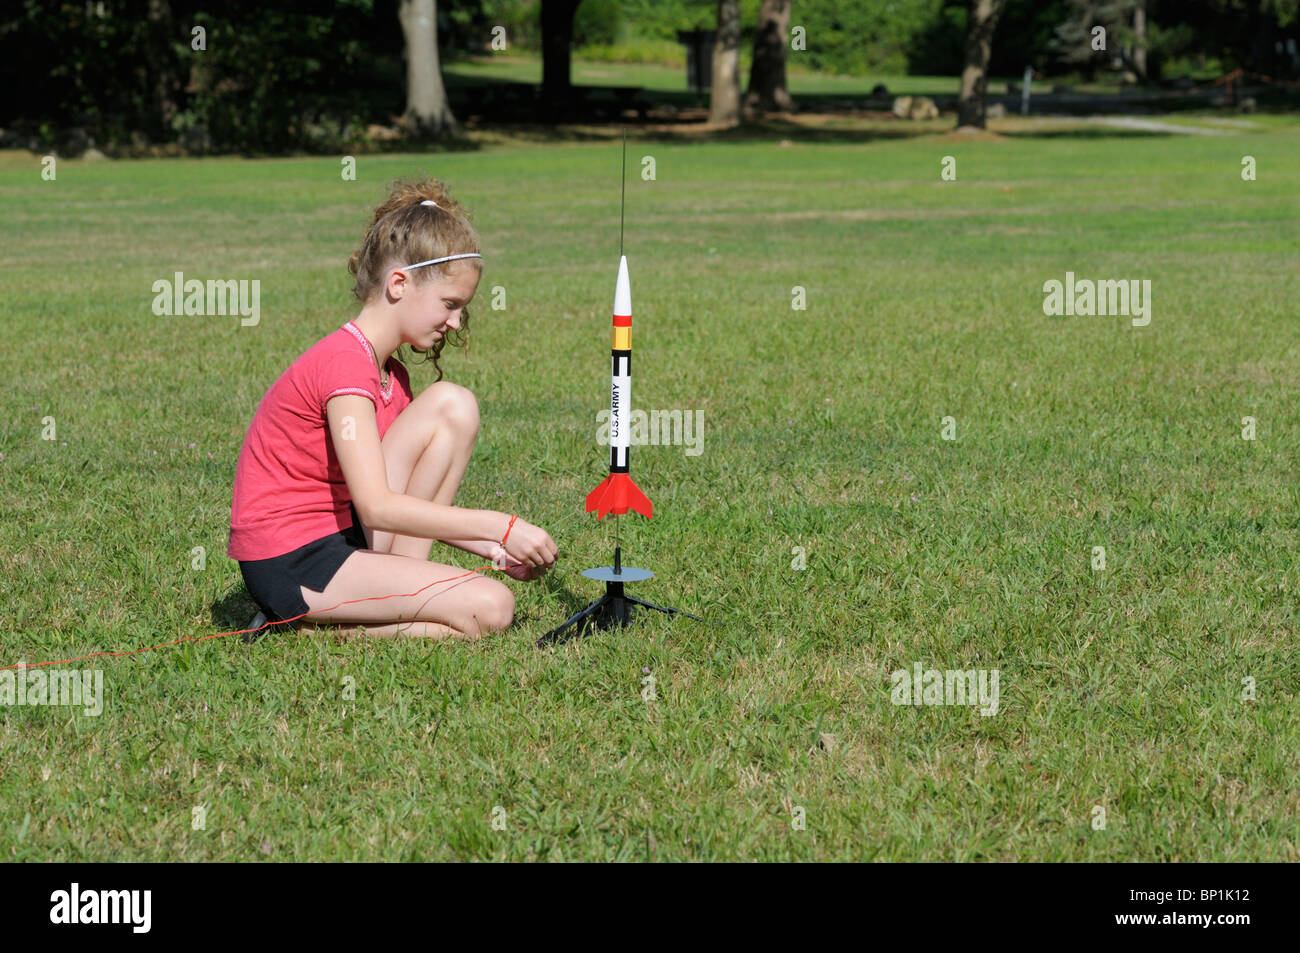 Girl, 11-12, setting up a model rocket to launch. Stock Photo